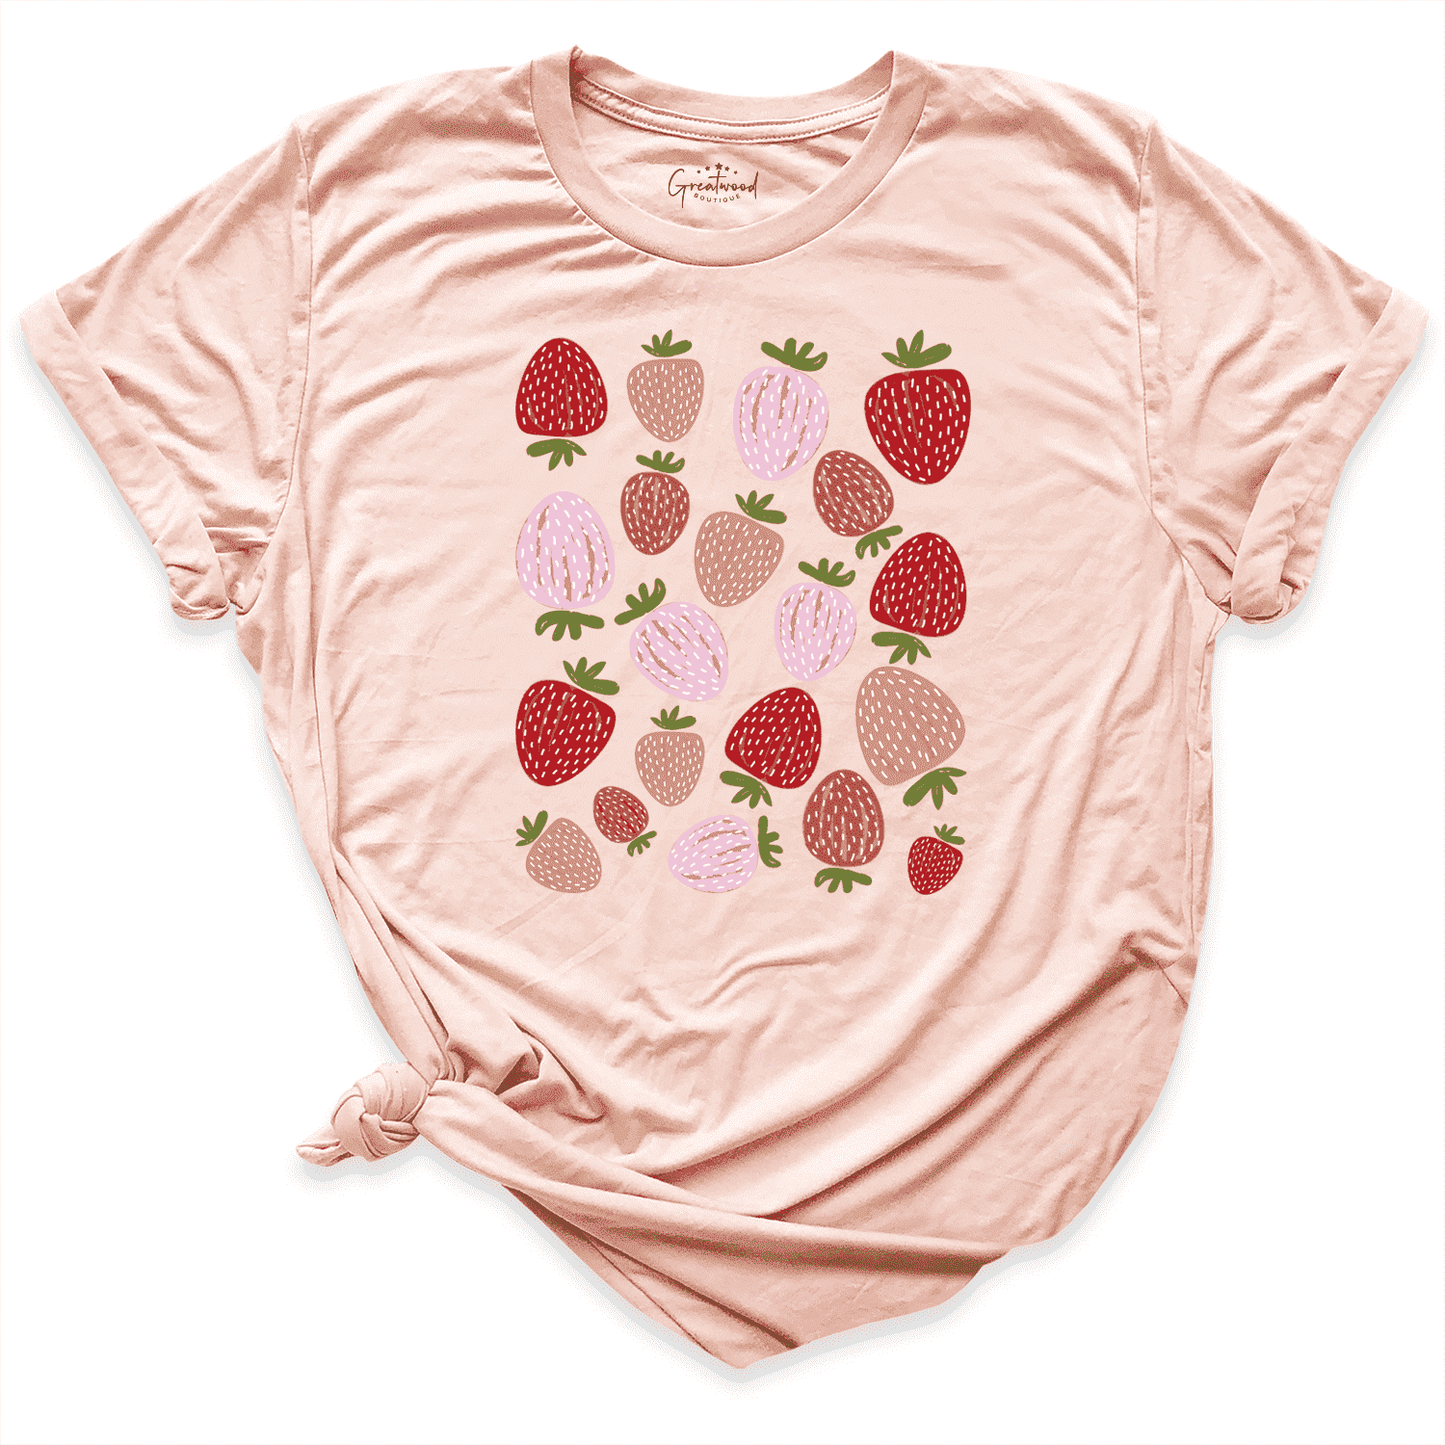 Strawberries Shirt Peach- Greatwood Boutique